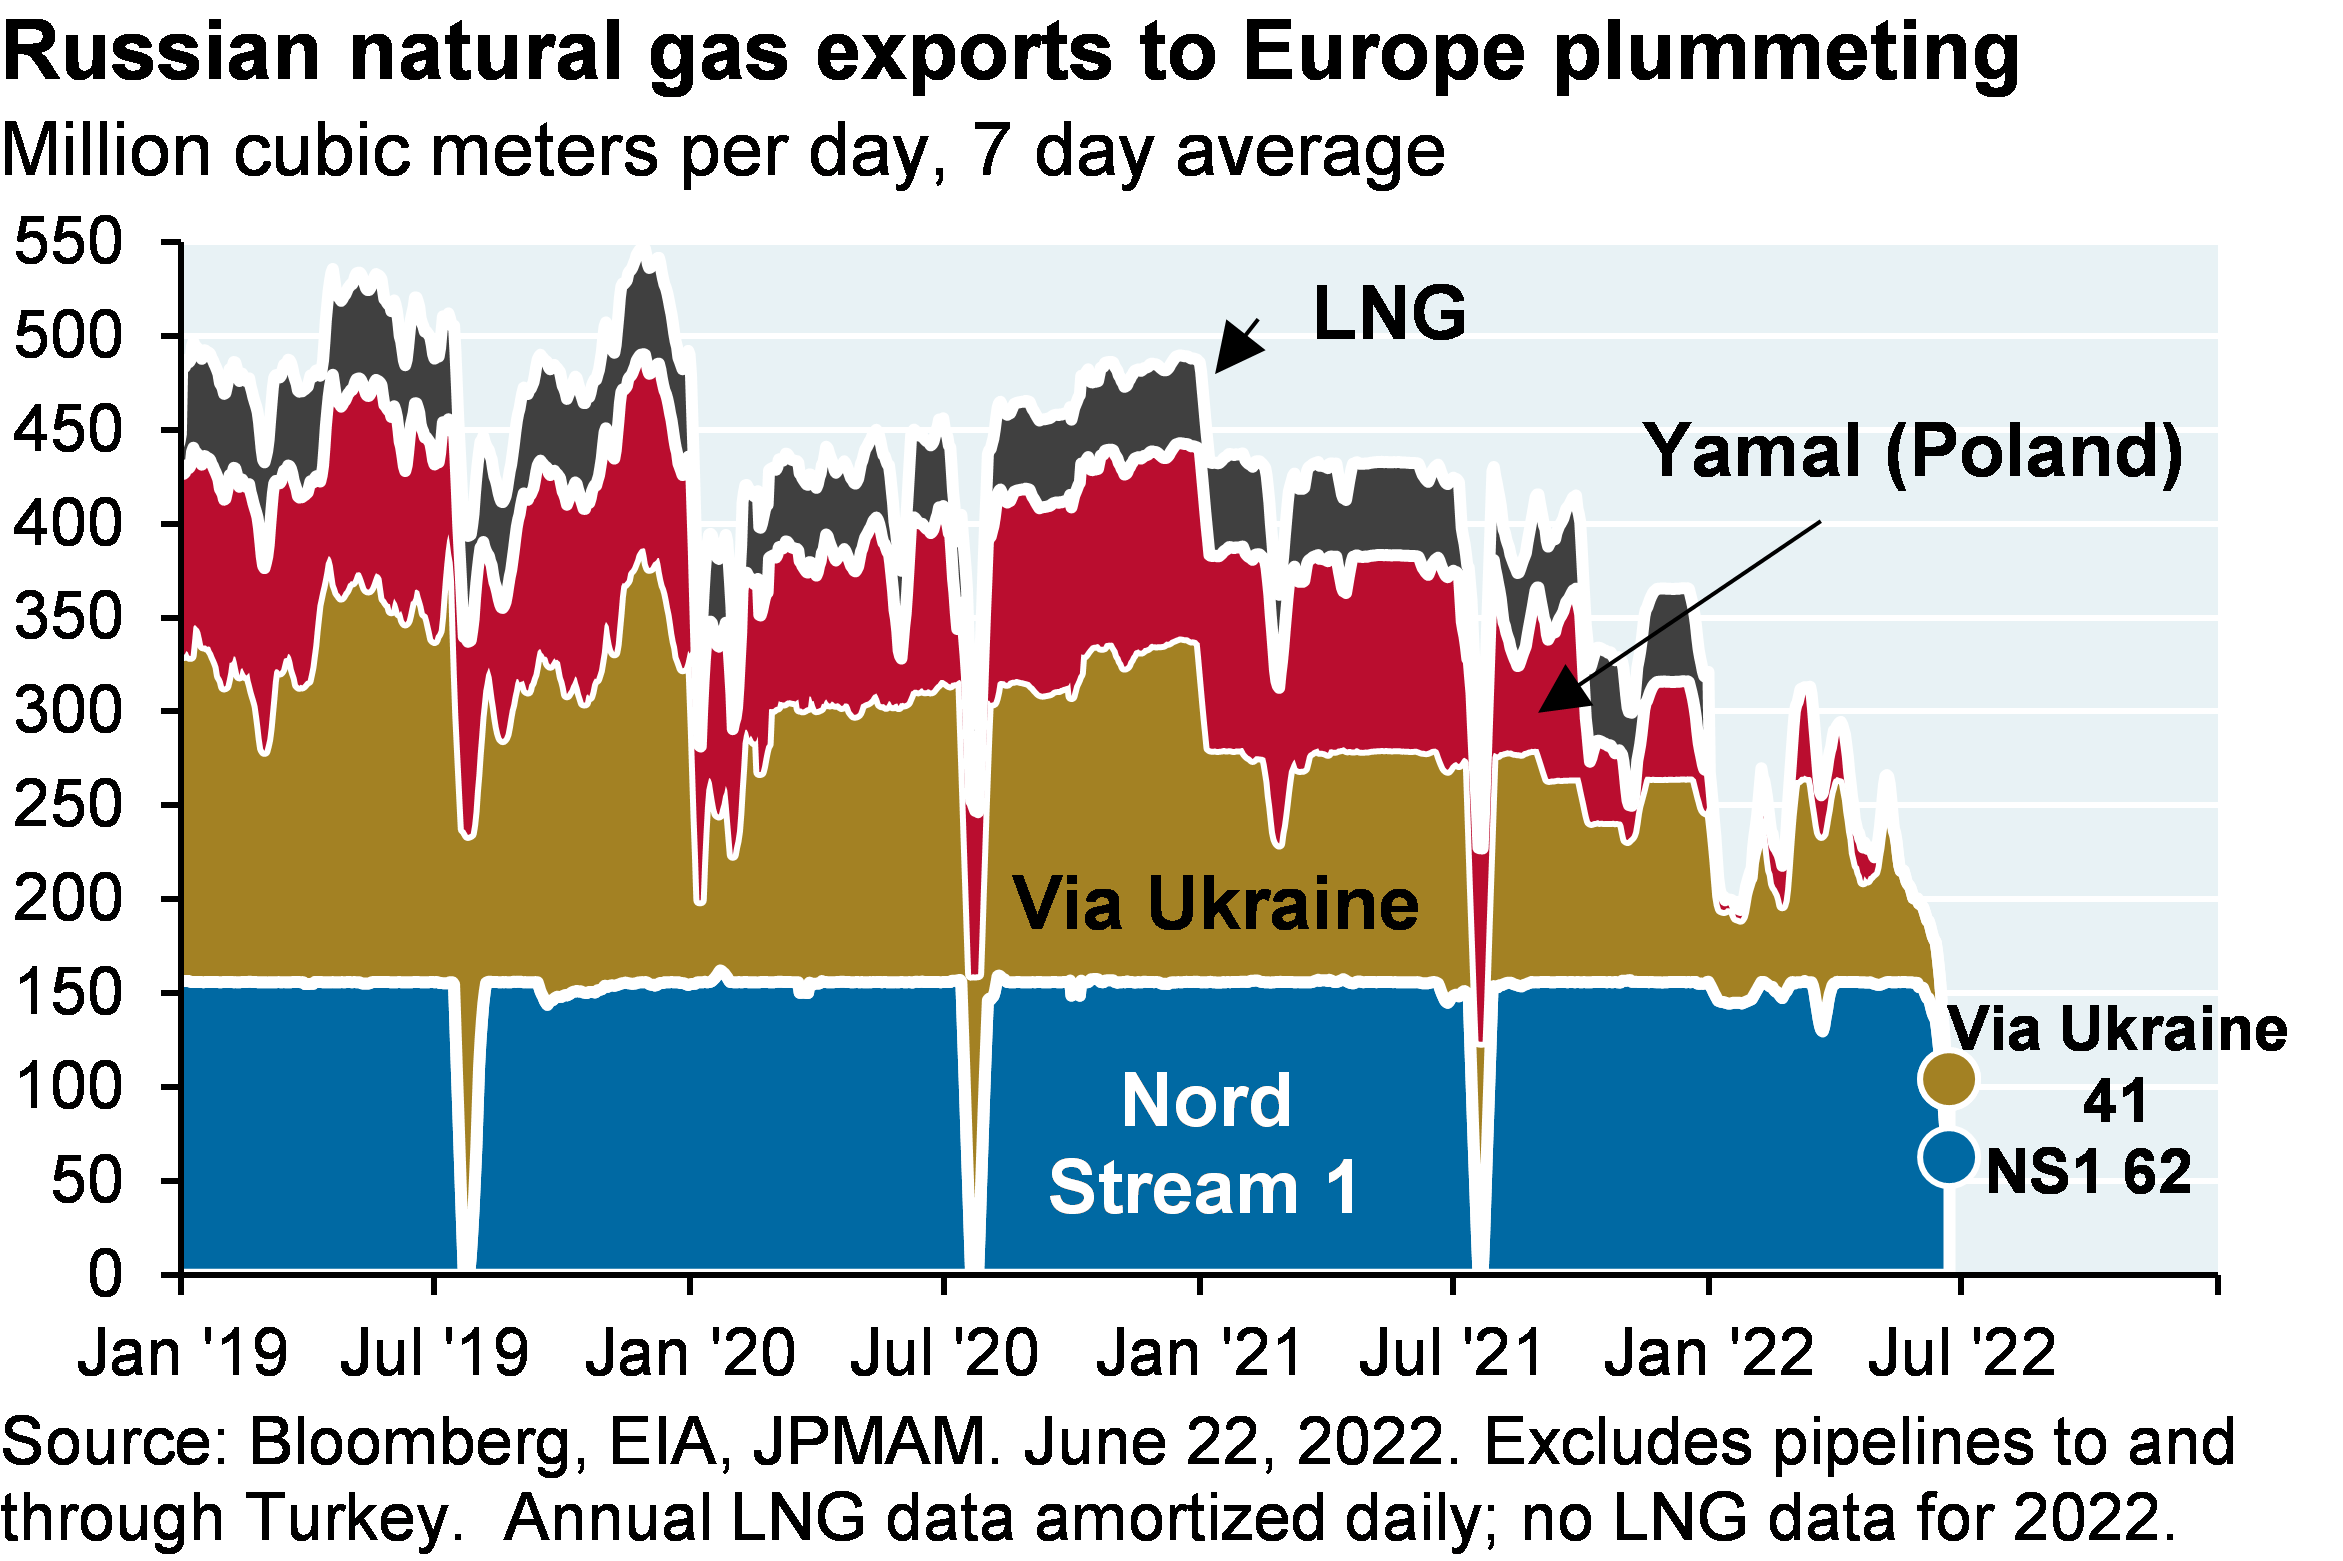 Russian natural gas exports to Europe plummmeting